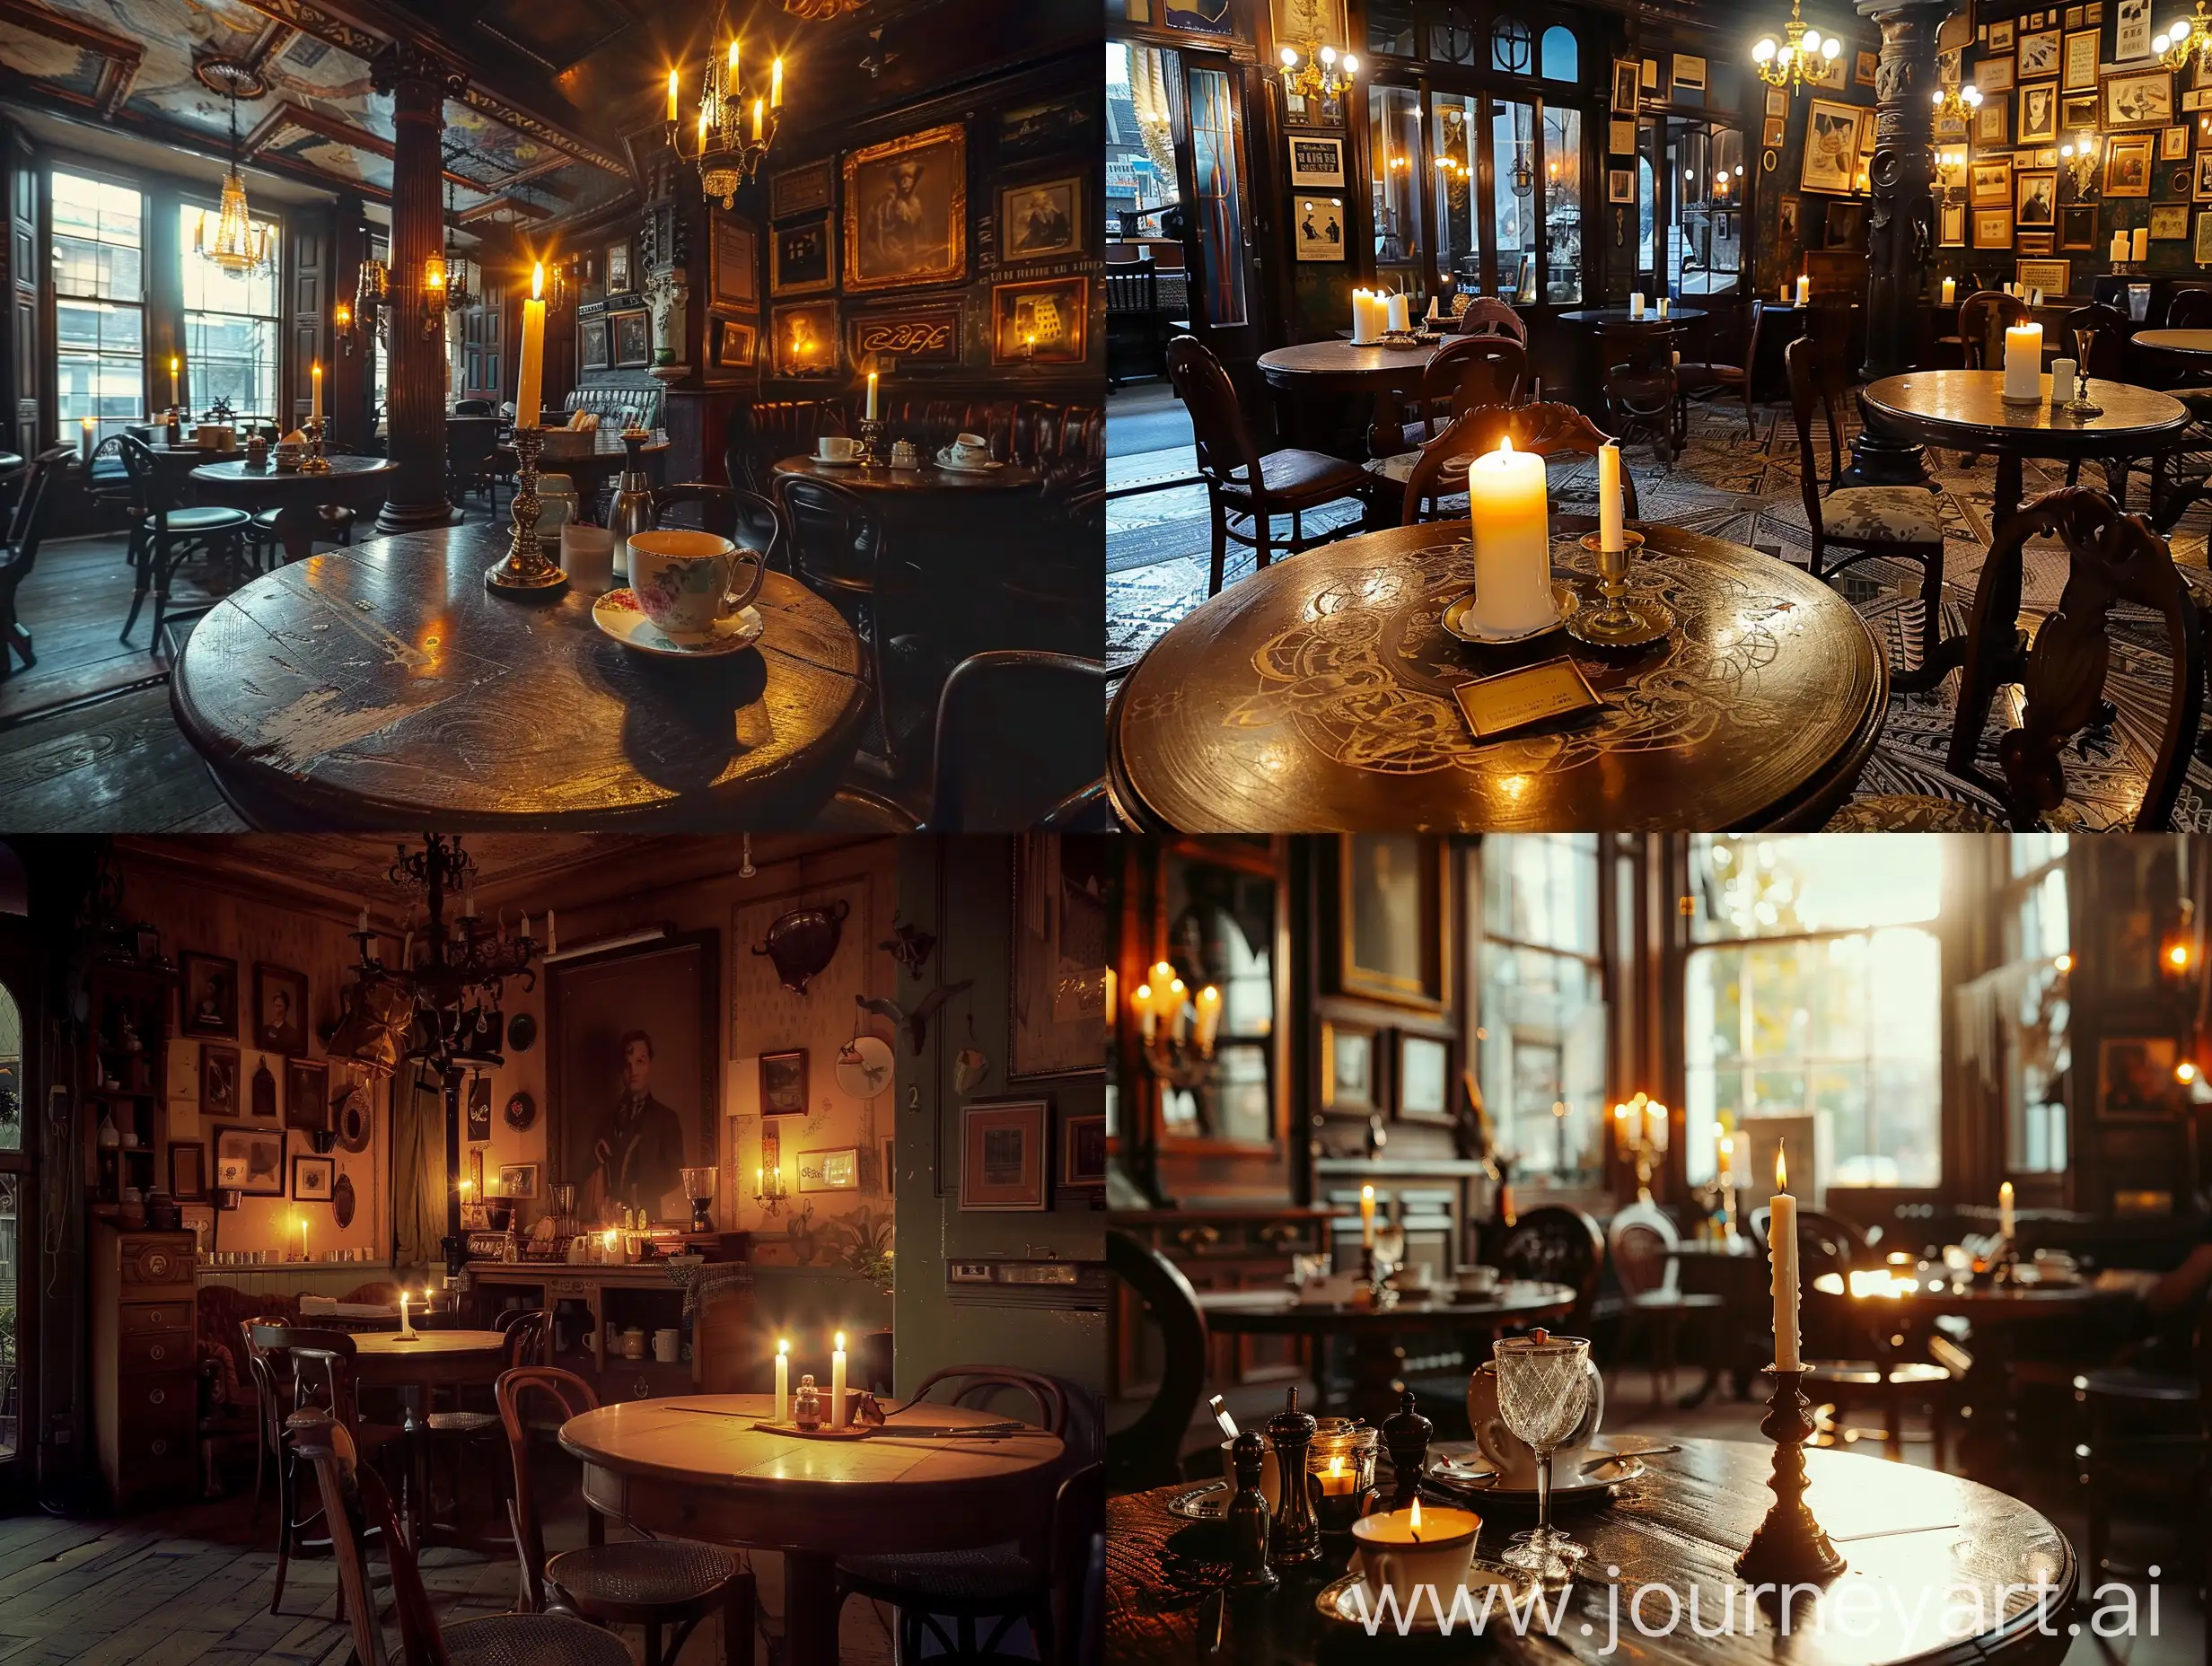 Describe this teInside London coffe house victorian age with candles